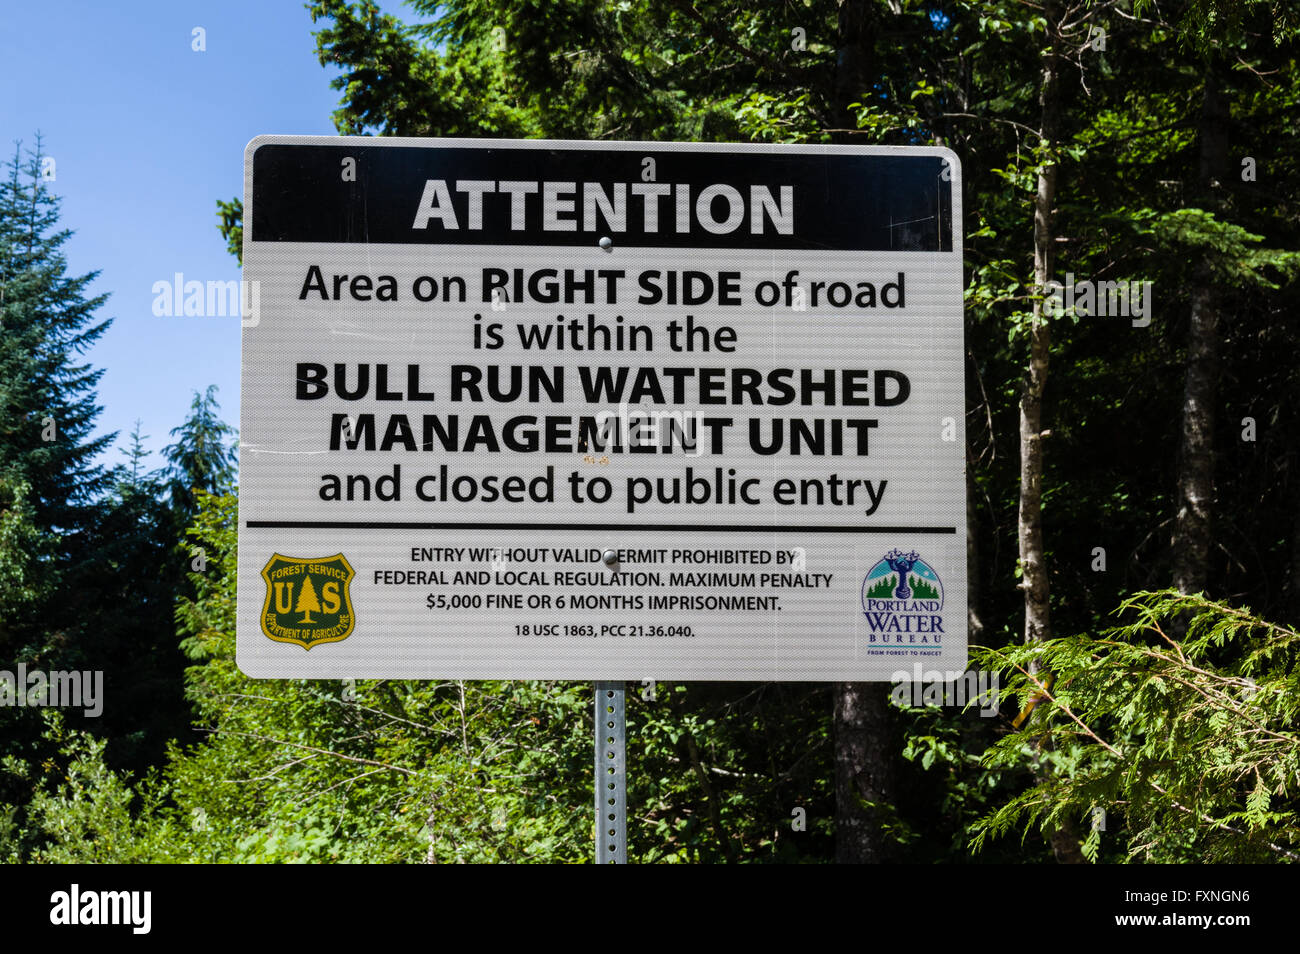 Am Bull Run Watershed Management Sign.  Mt. Hood National Forest, Oregon Stockfoto